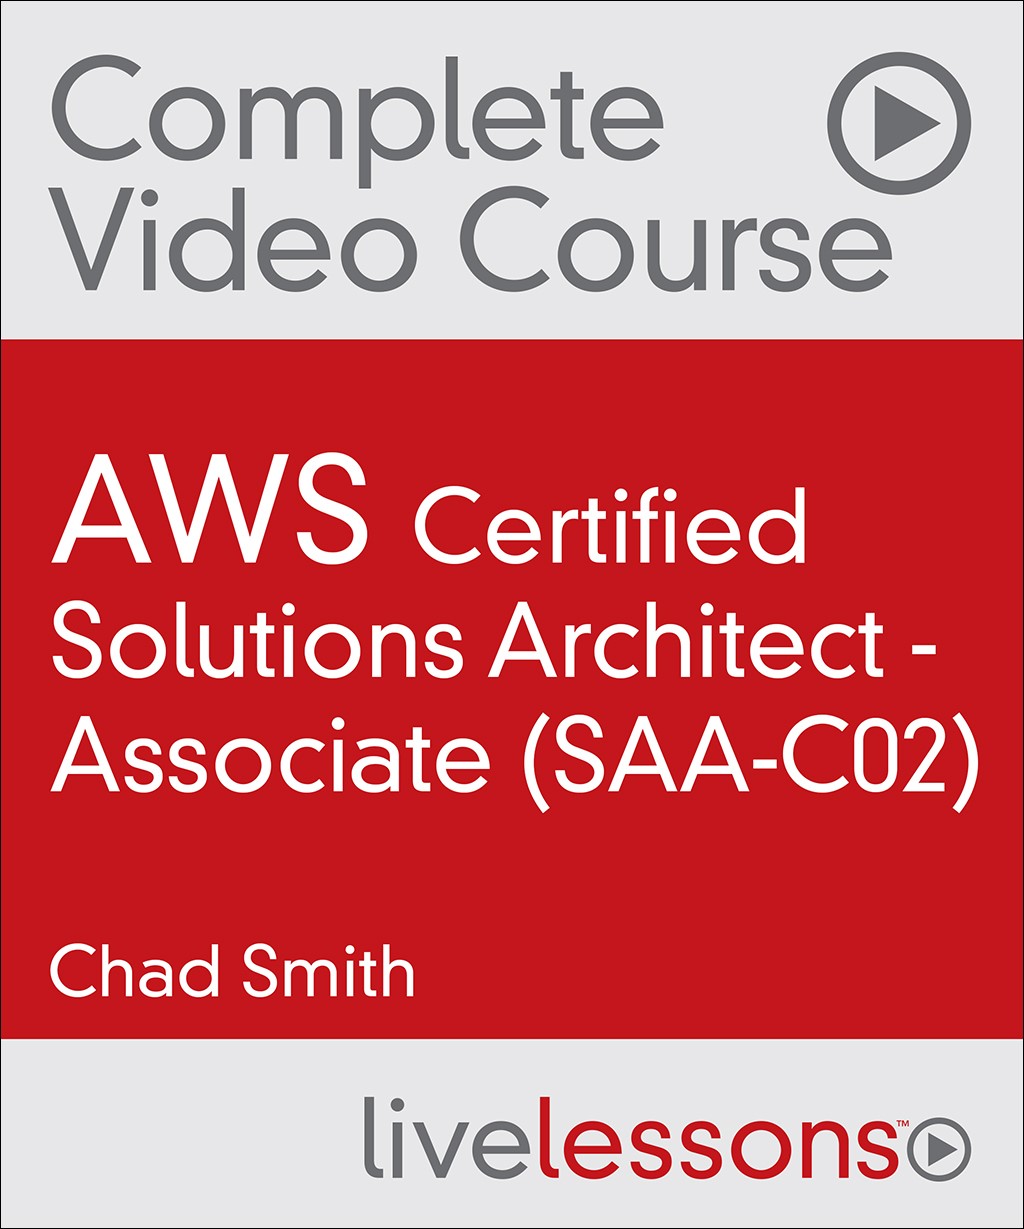 AWS Certified Solutions Architect - Associate (SAA-C02) Complete Video Course (Video Training)